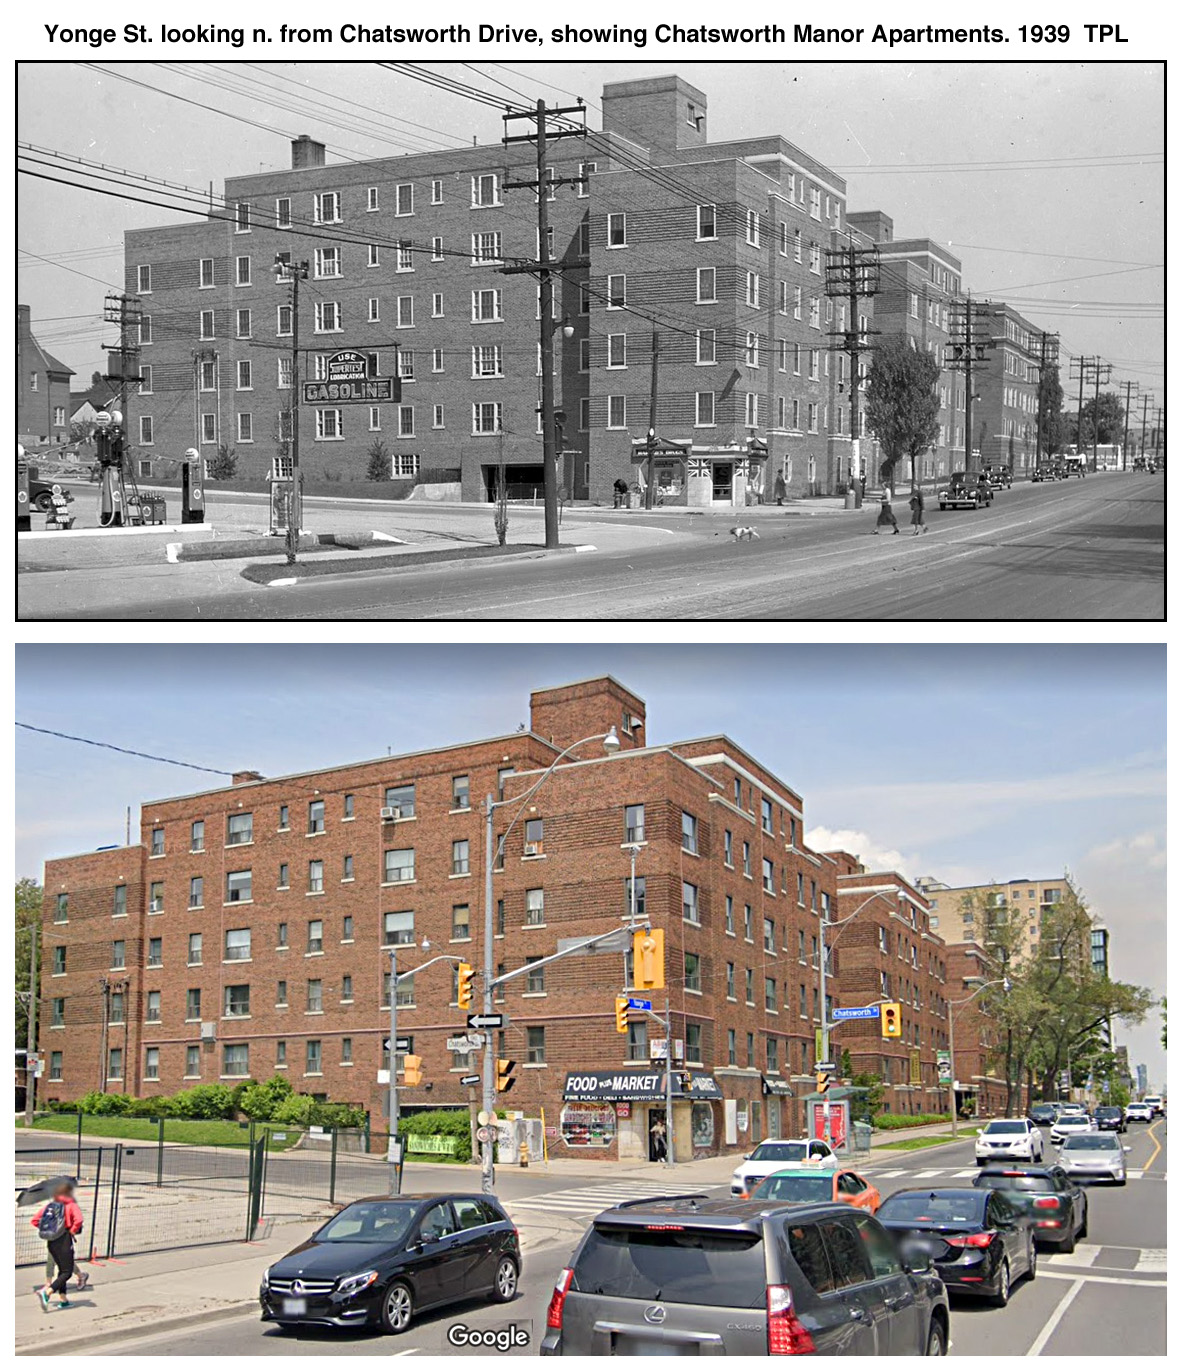 Yonge St. looking n. from Chatsworth Drive, showing Chatsworth Manor Apartments. 1939  TPL.jpg